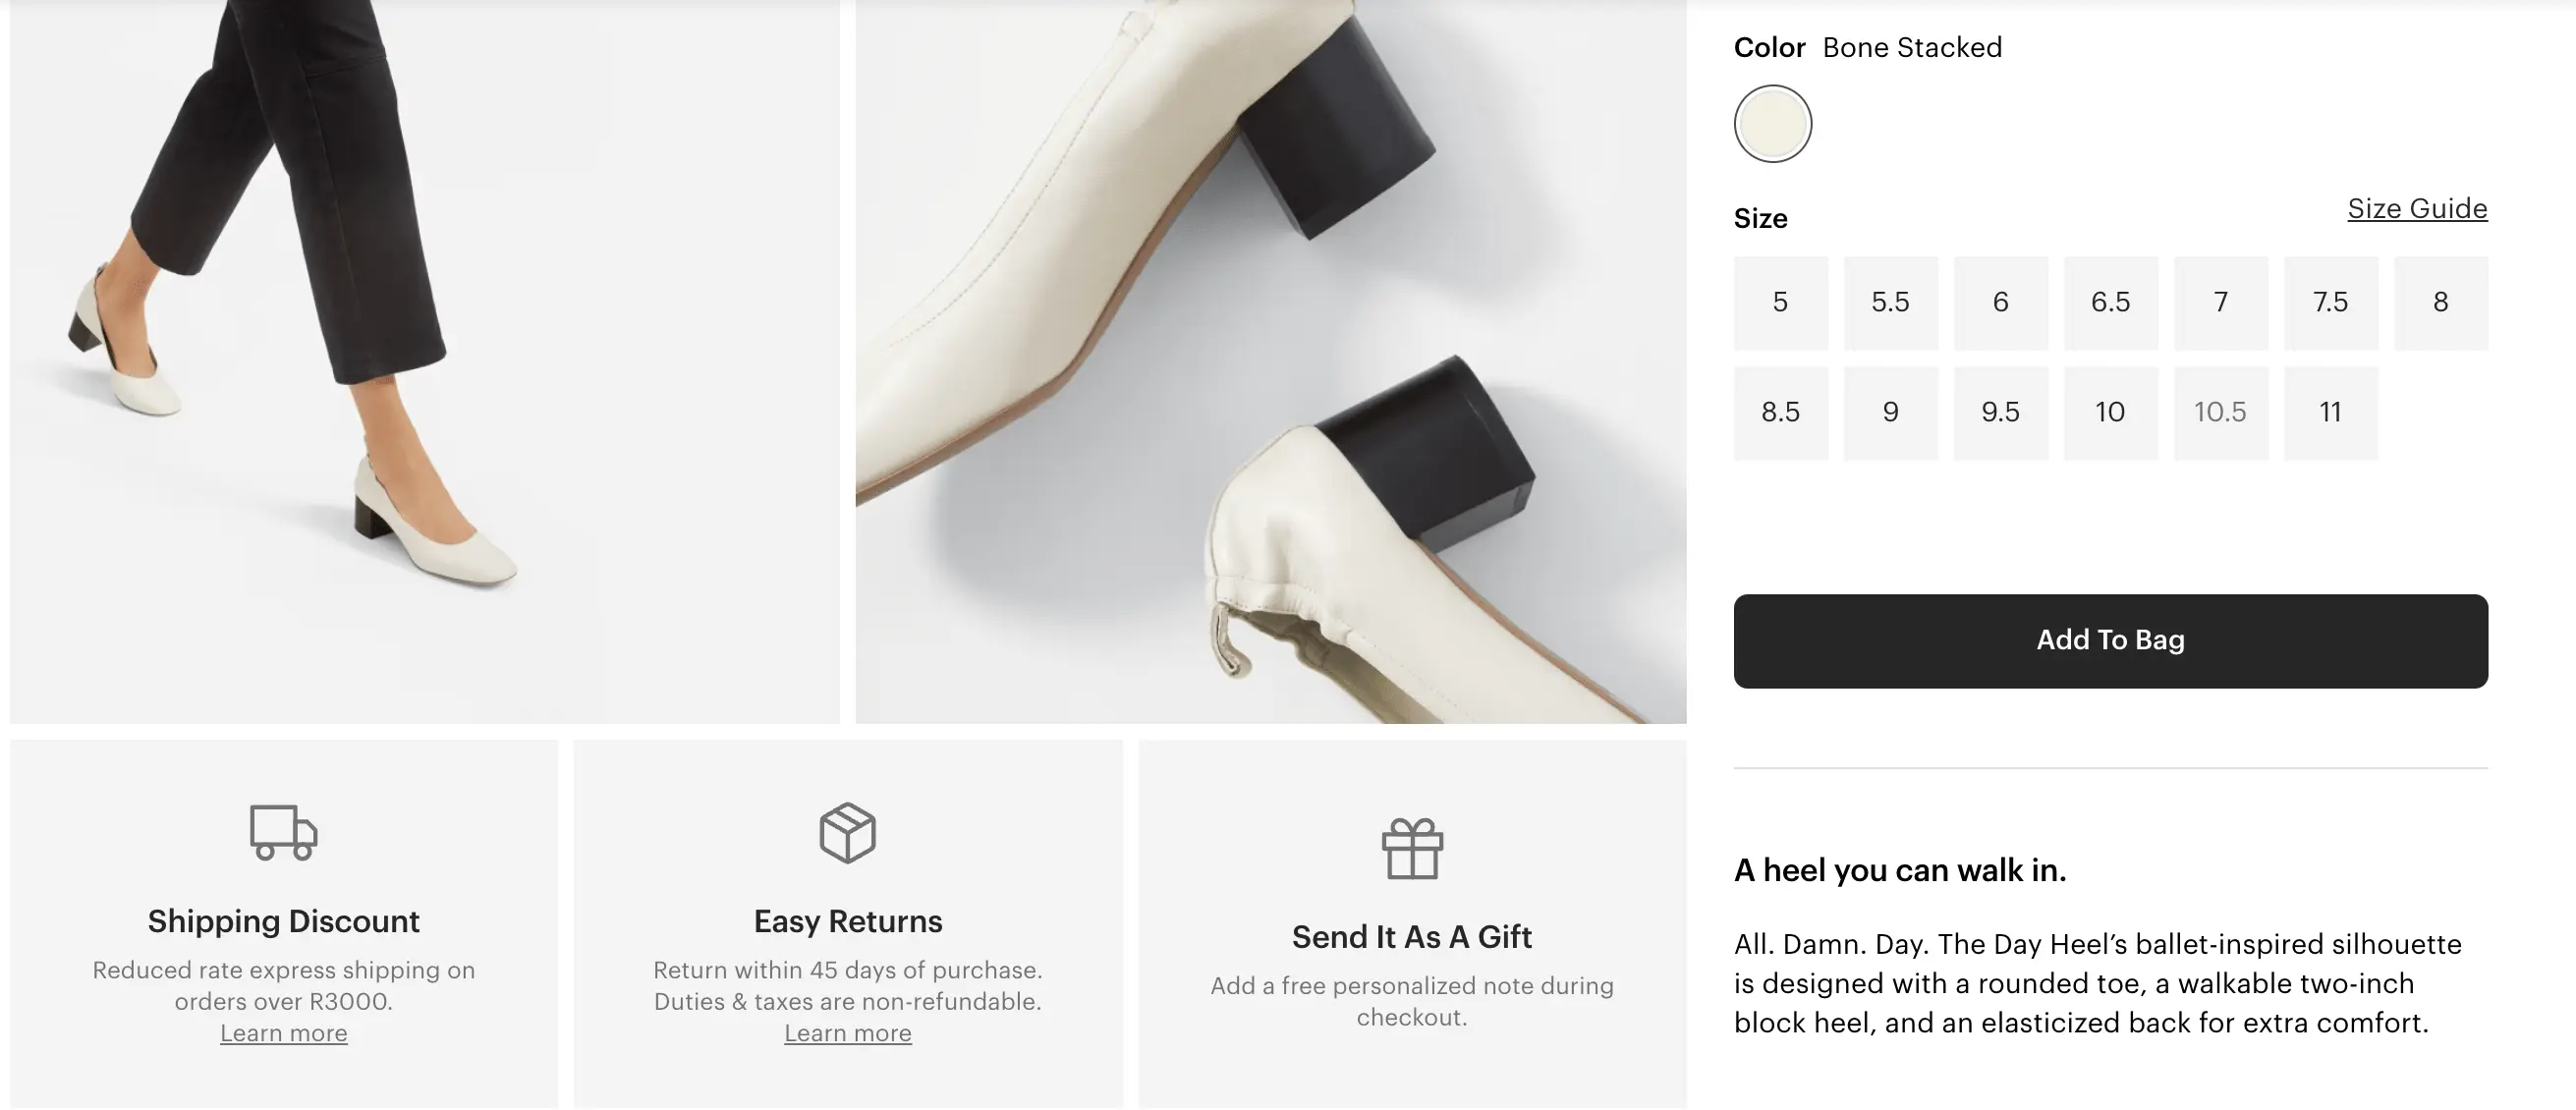 An example of Everlane's product description showing the importance of a tone